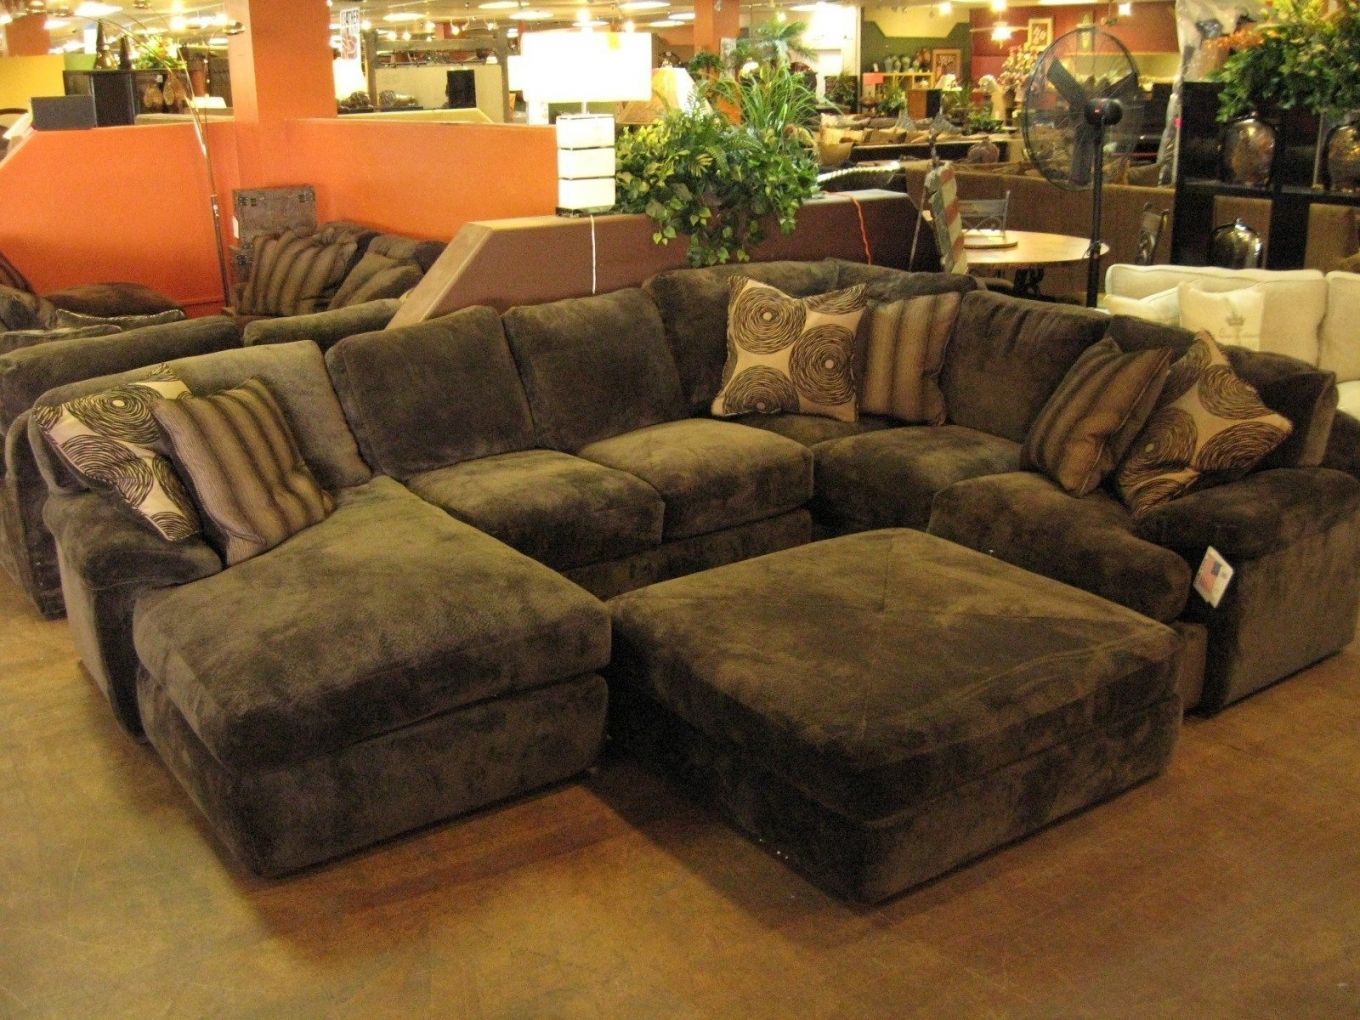 Comfortable Sectional Sofa Pertaining To Comfortable Sectional Sofa (View 9 of 15)